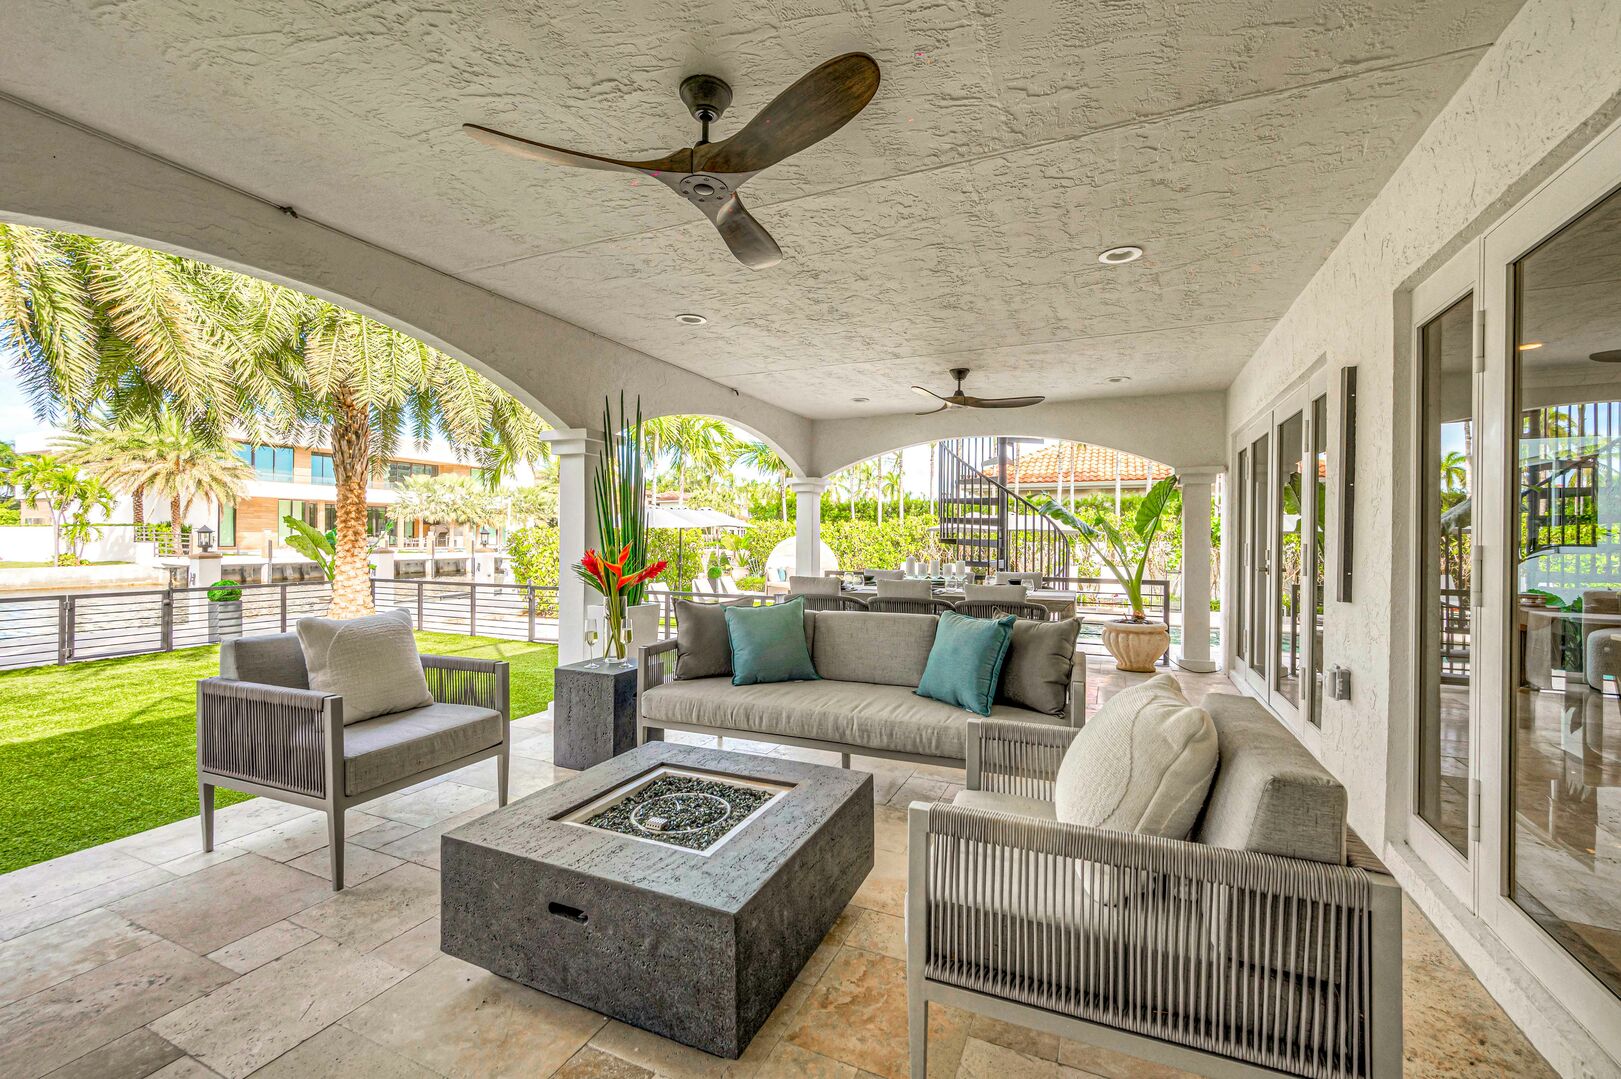 The covered patio contains a dining table for eight and a sitting area with TV and fire pit.